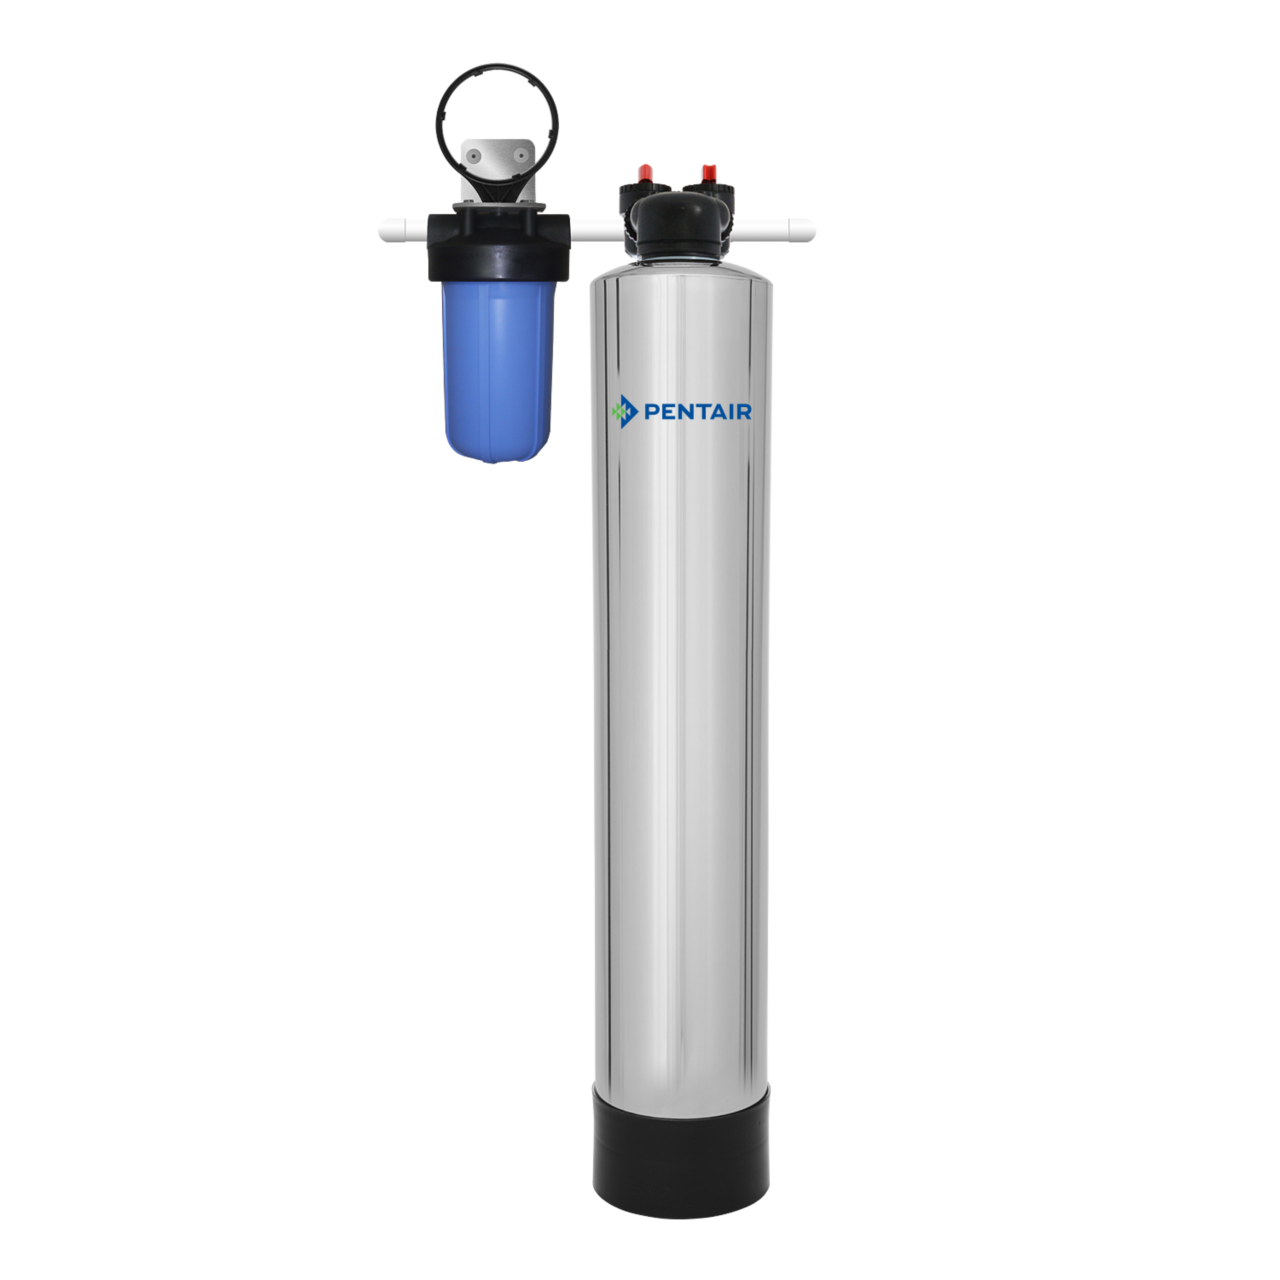 Whole House Water Filter System (1-3 Bathrooms)